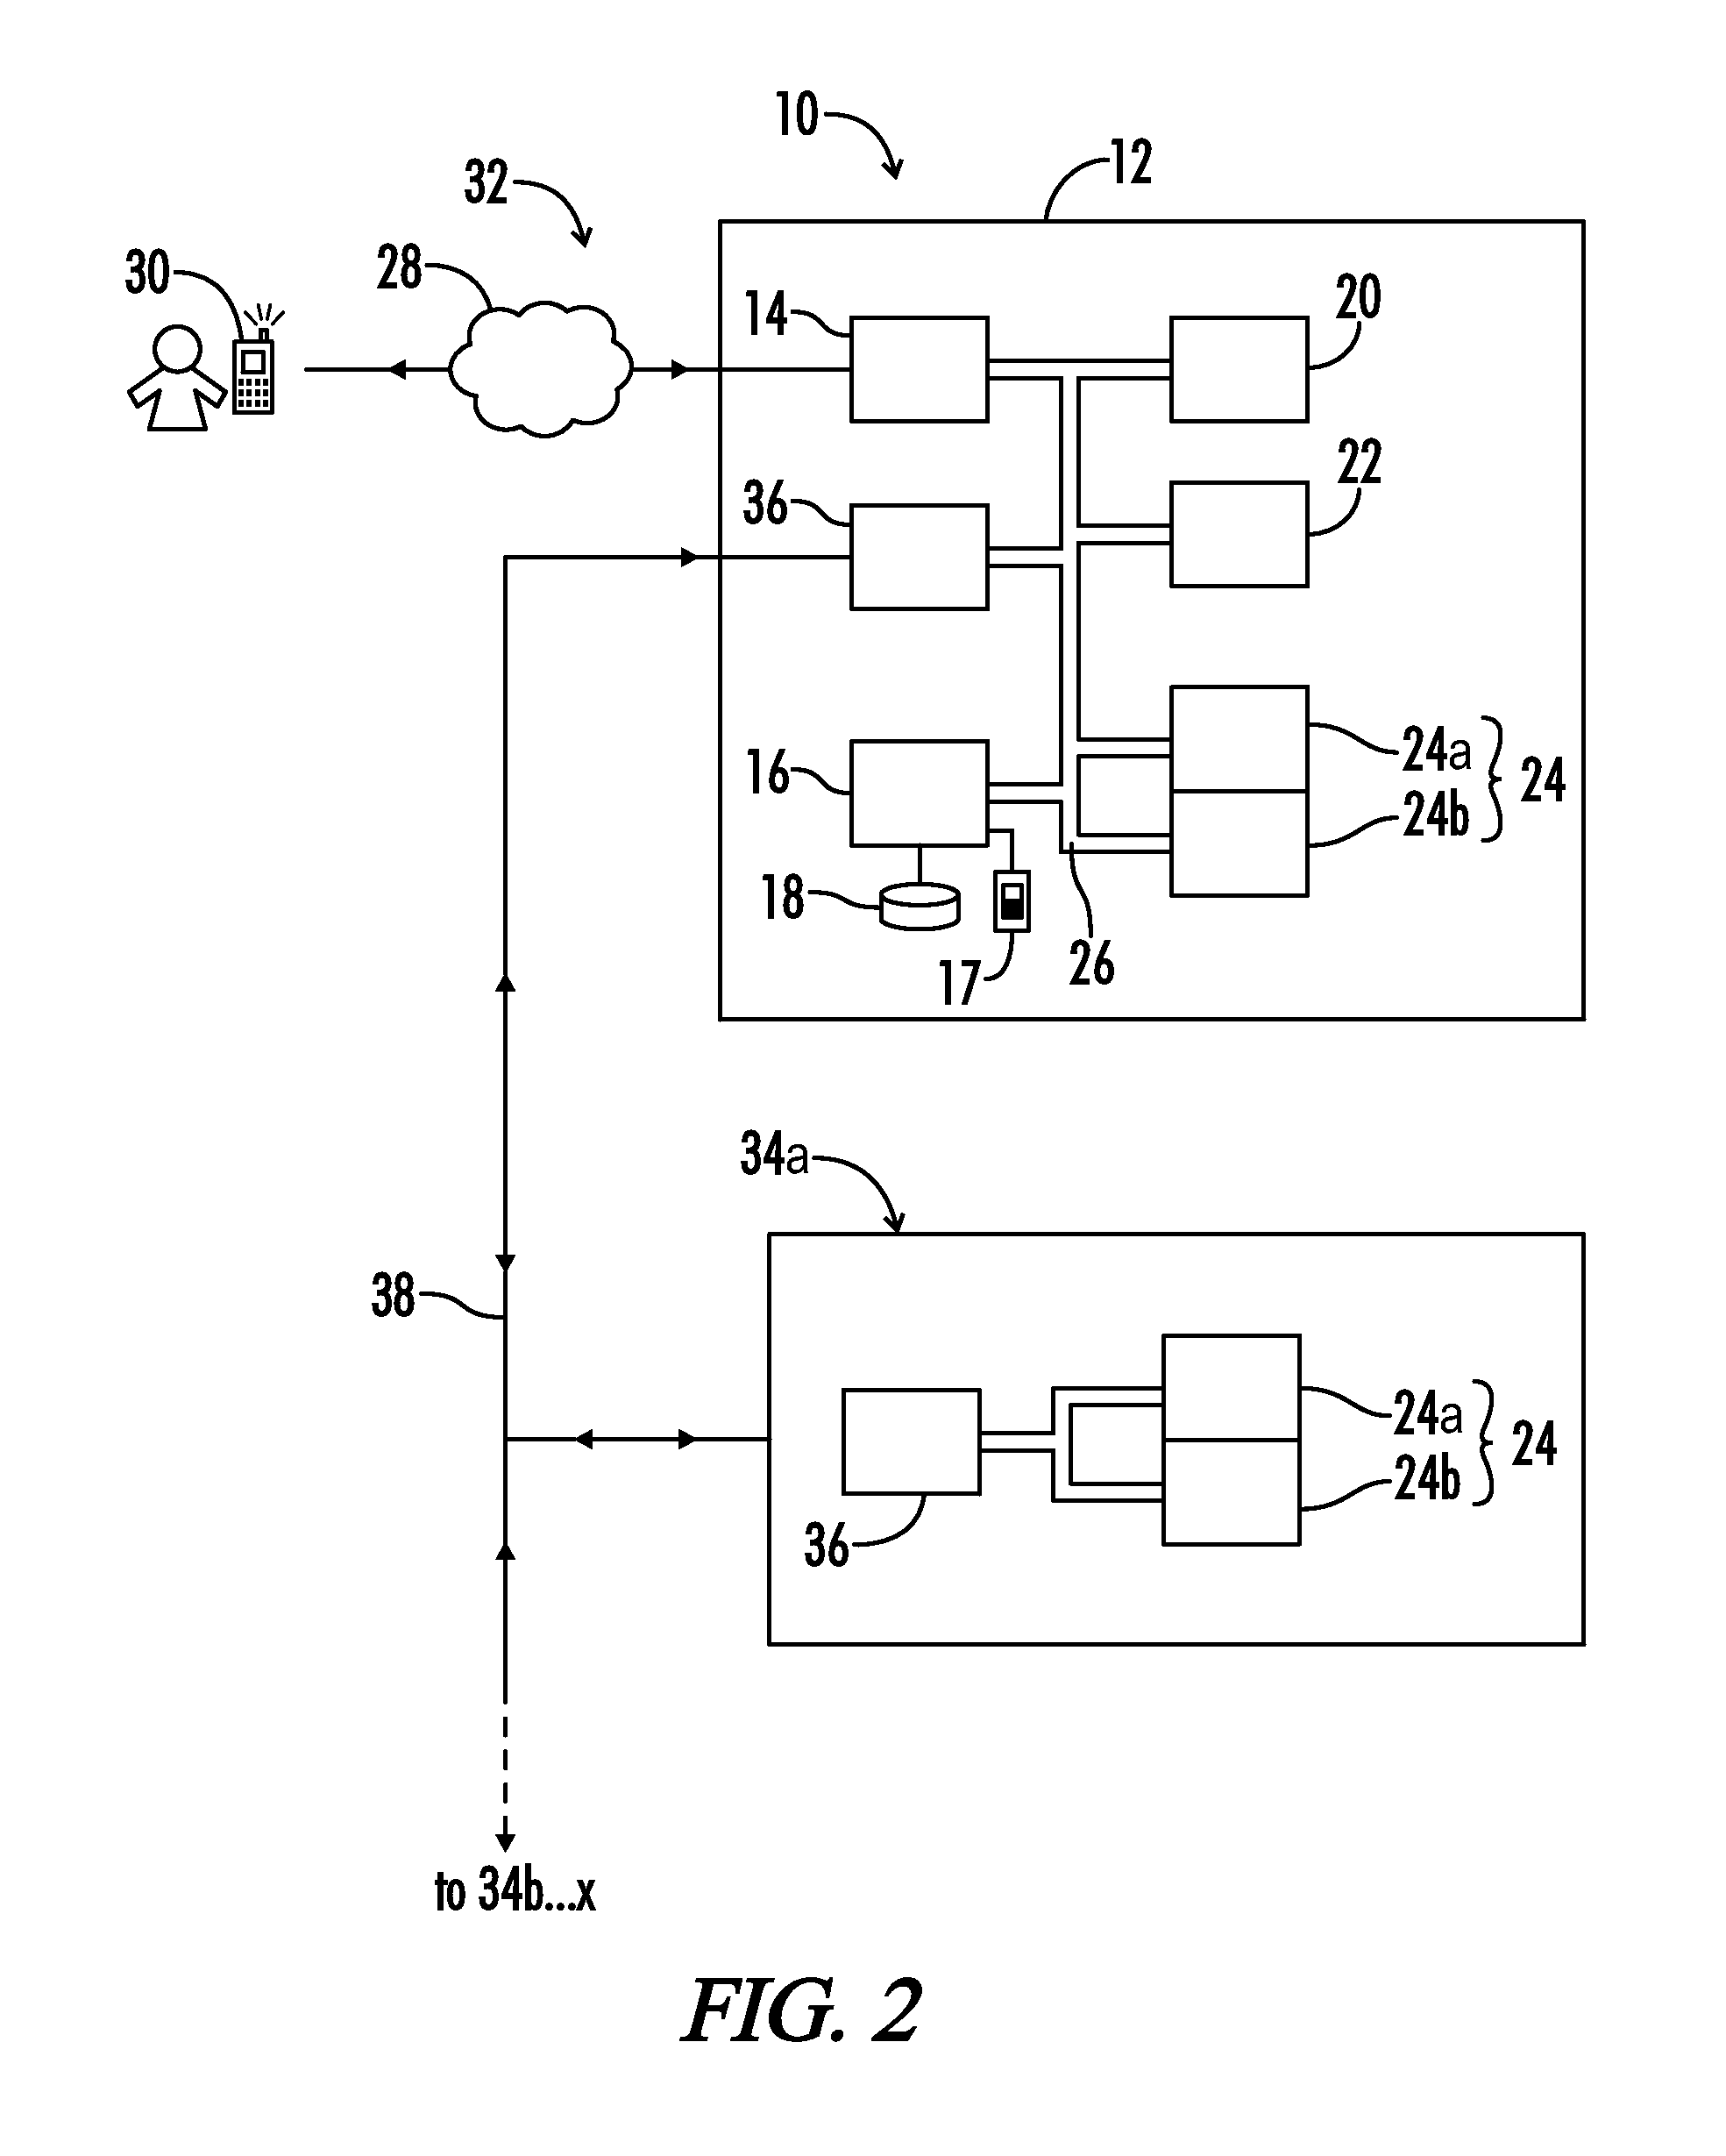 Multifunction traffic control and information system